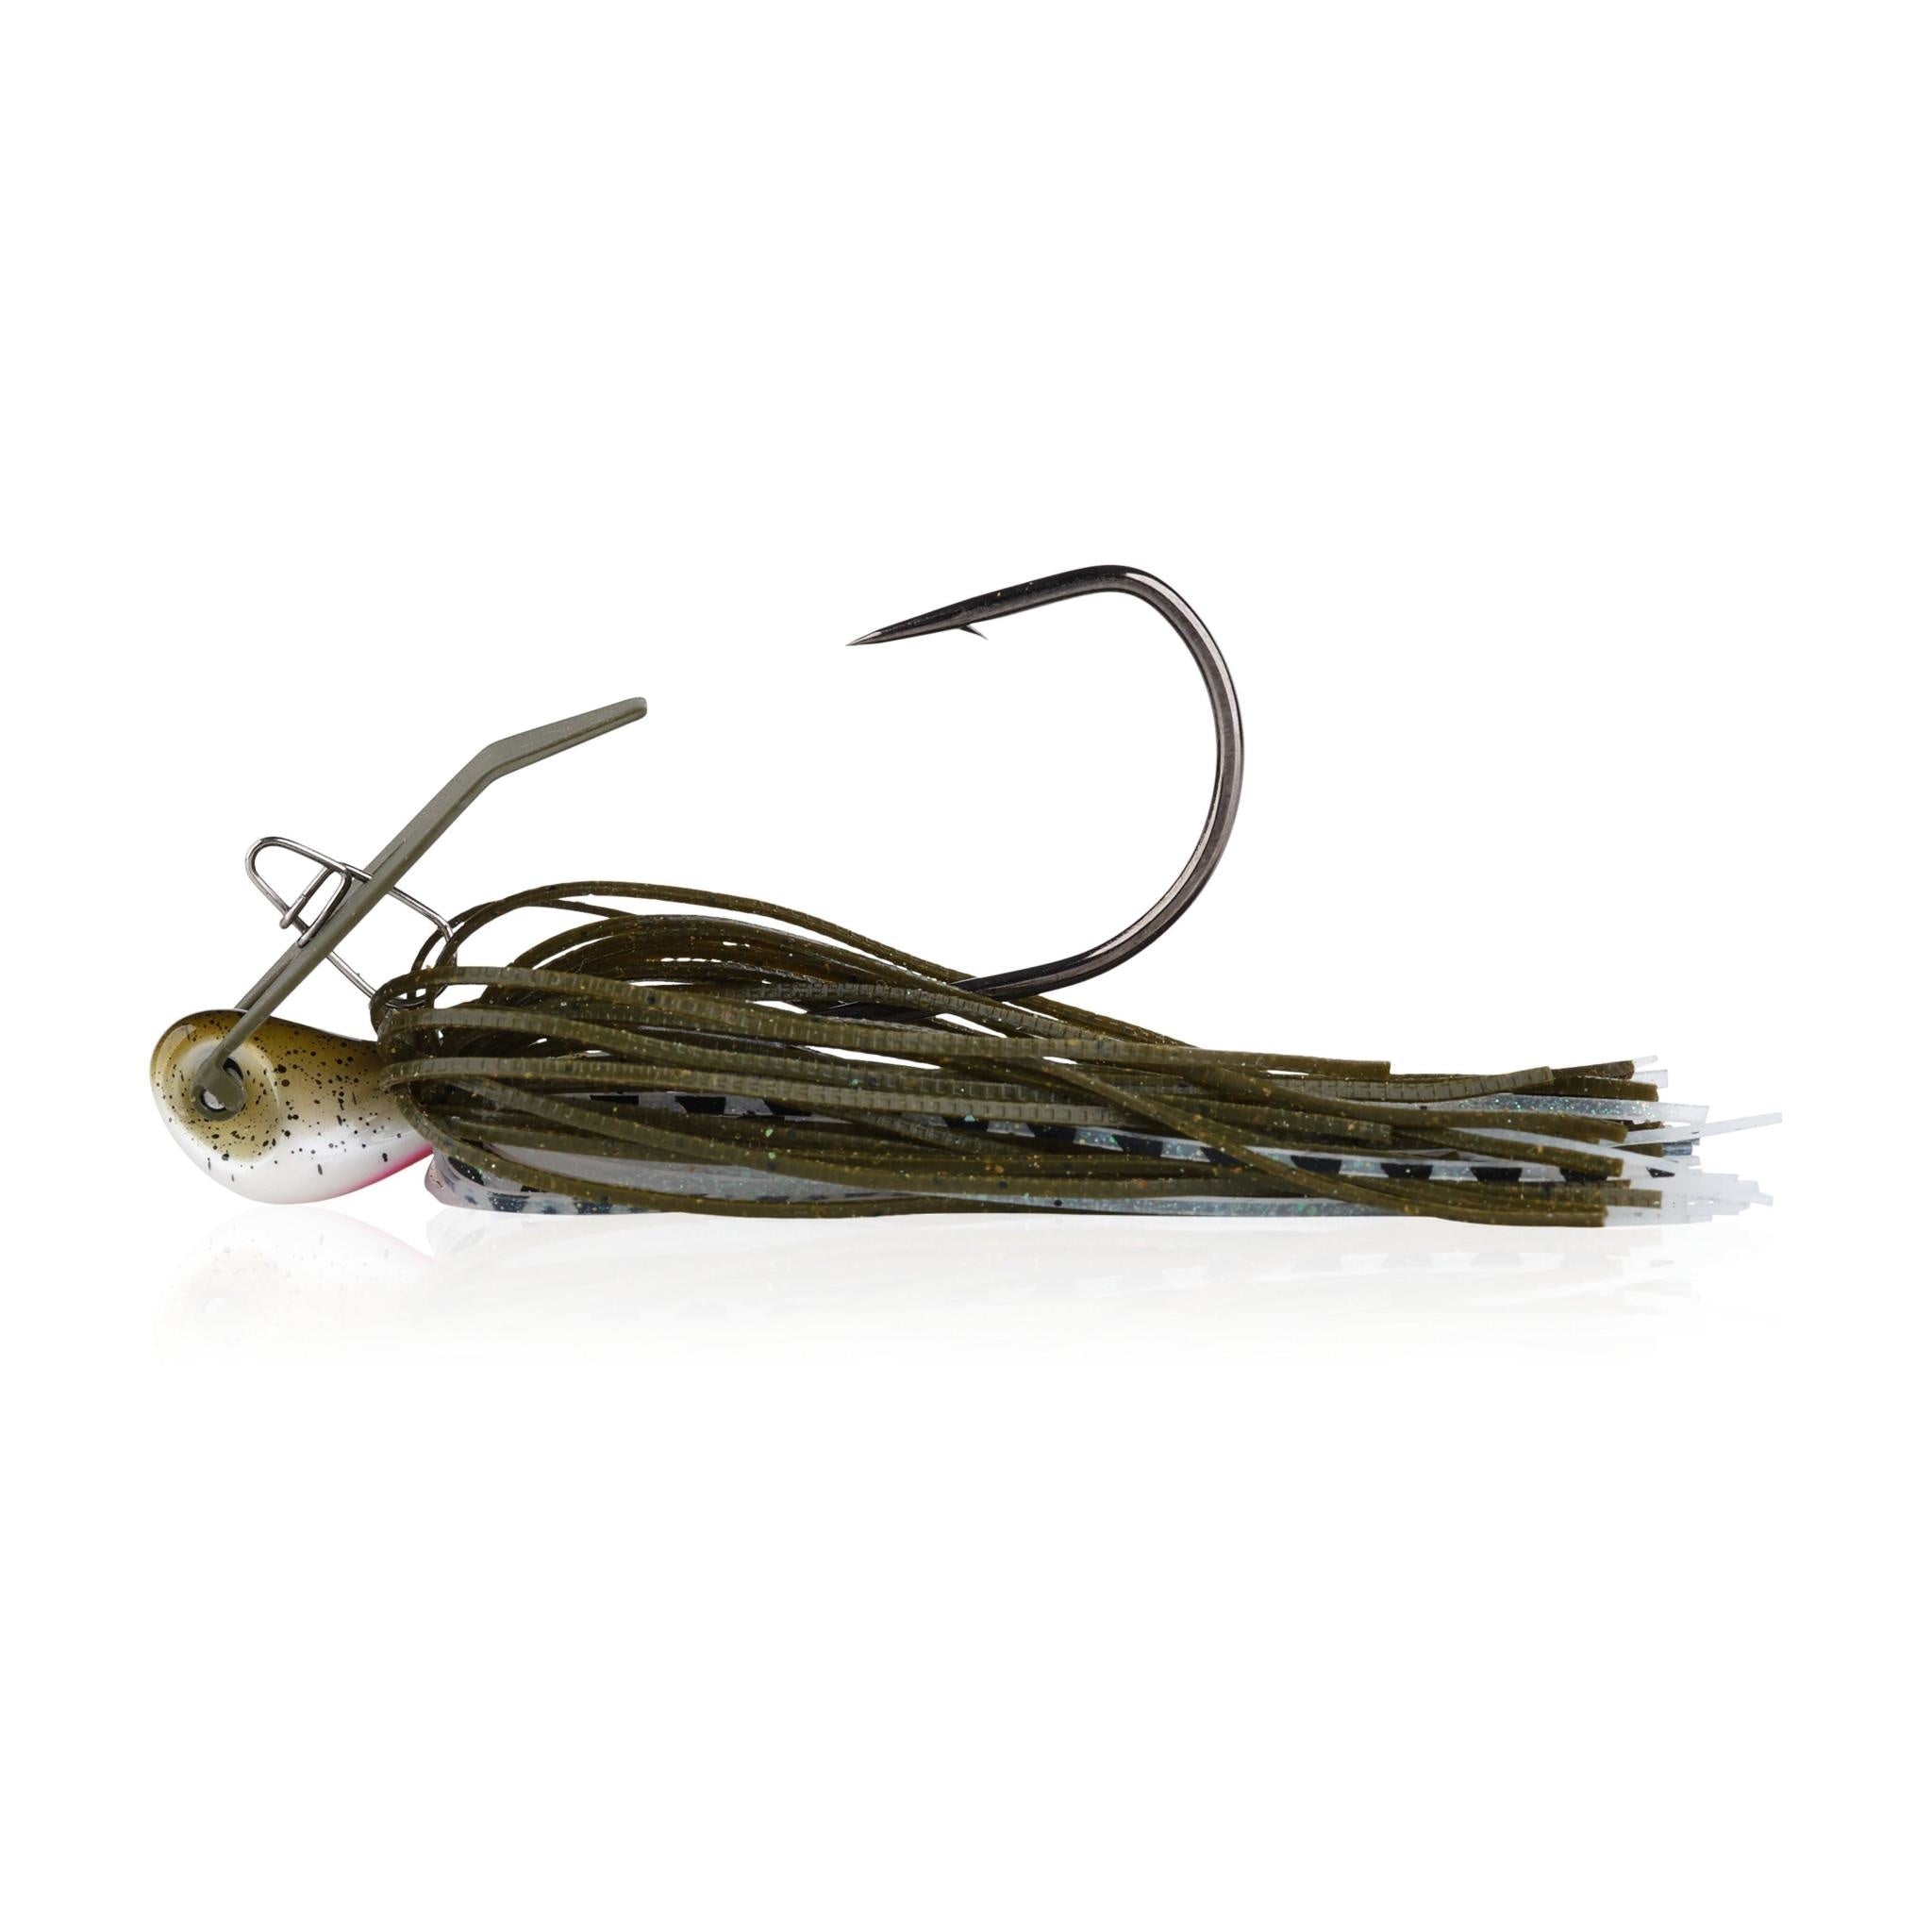 NORTHLAND FISHING TACKLE - Fire-Ball® Spin Jigs - Firetiger - 1/4